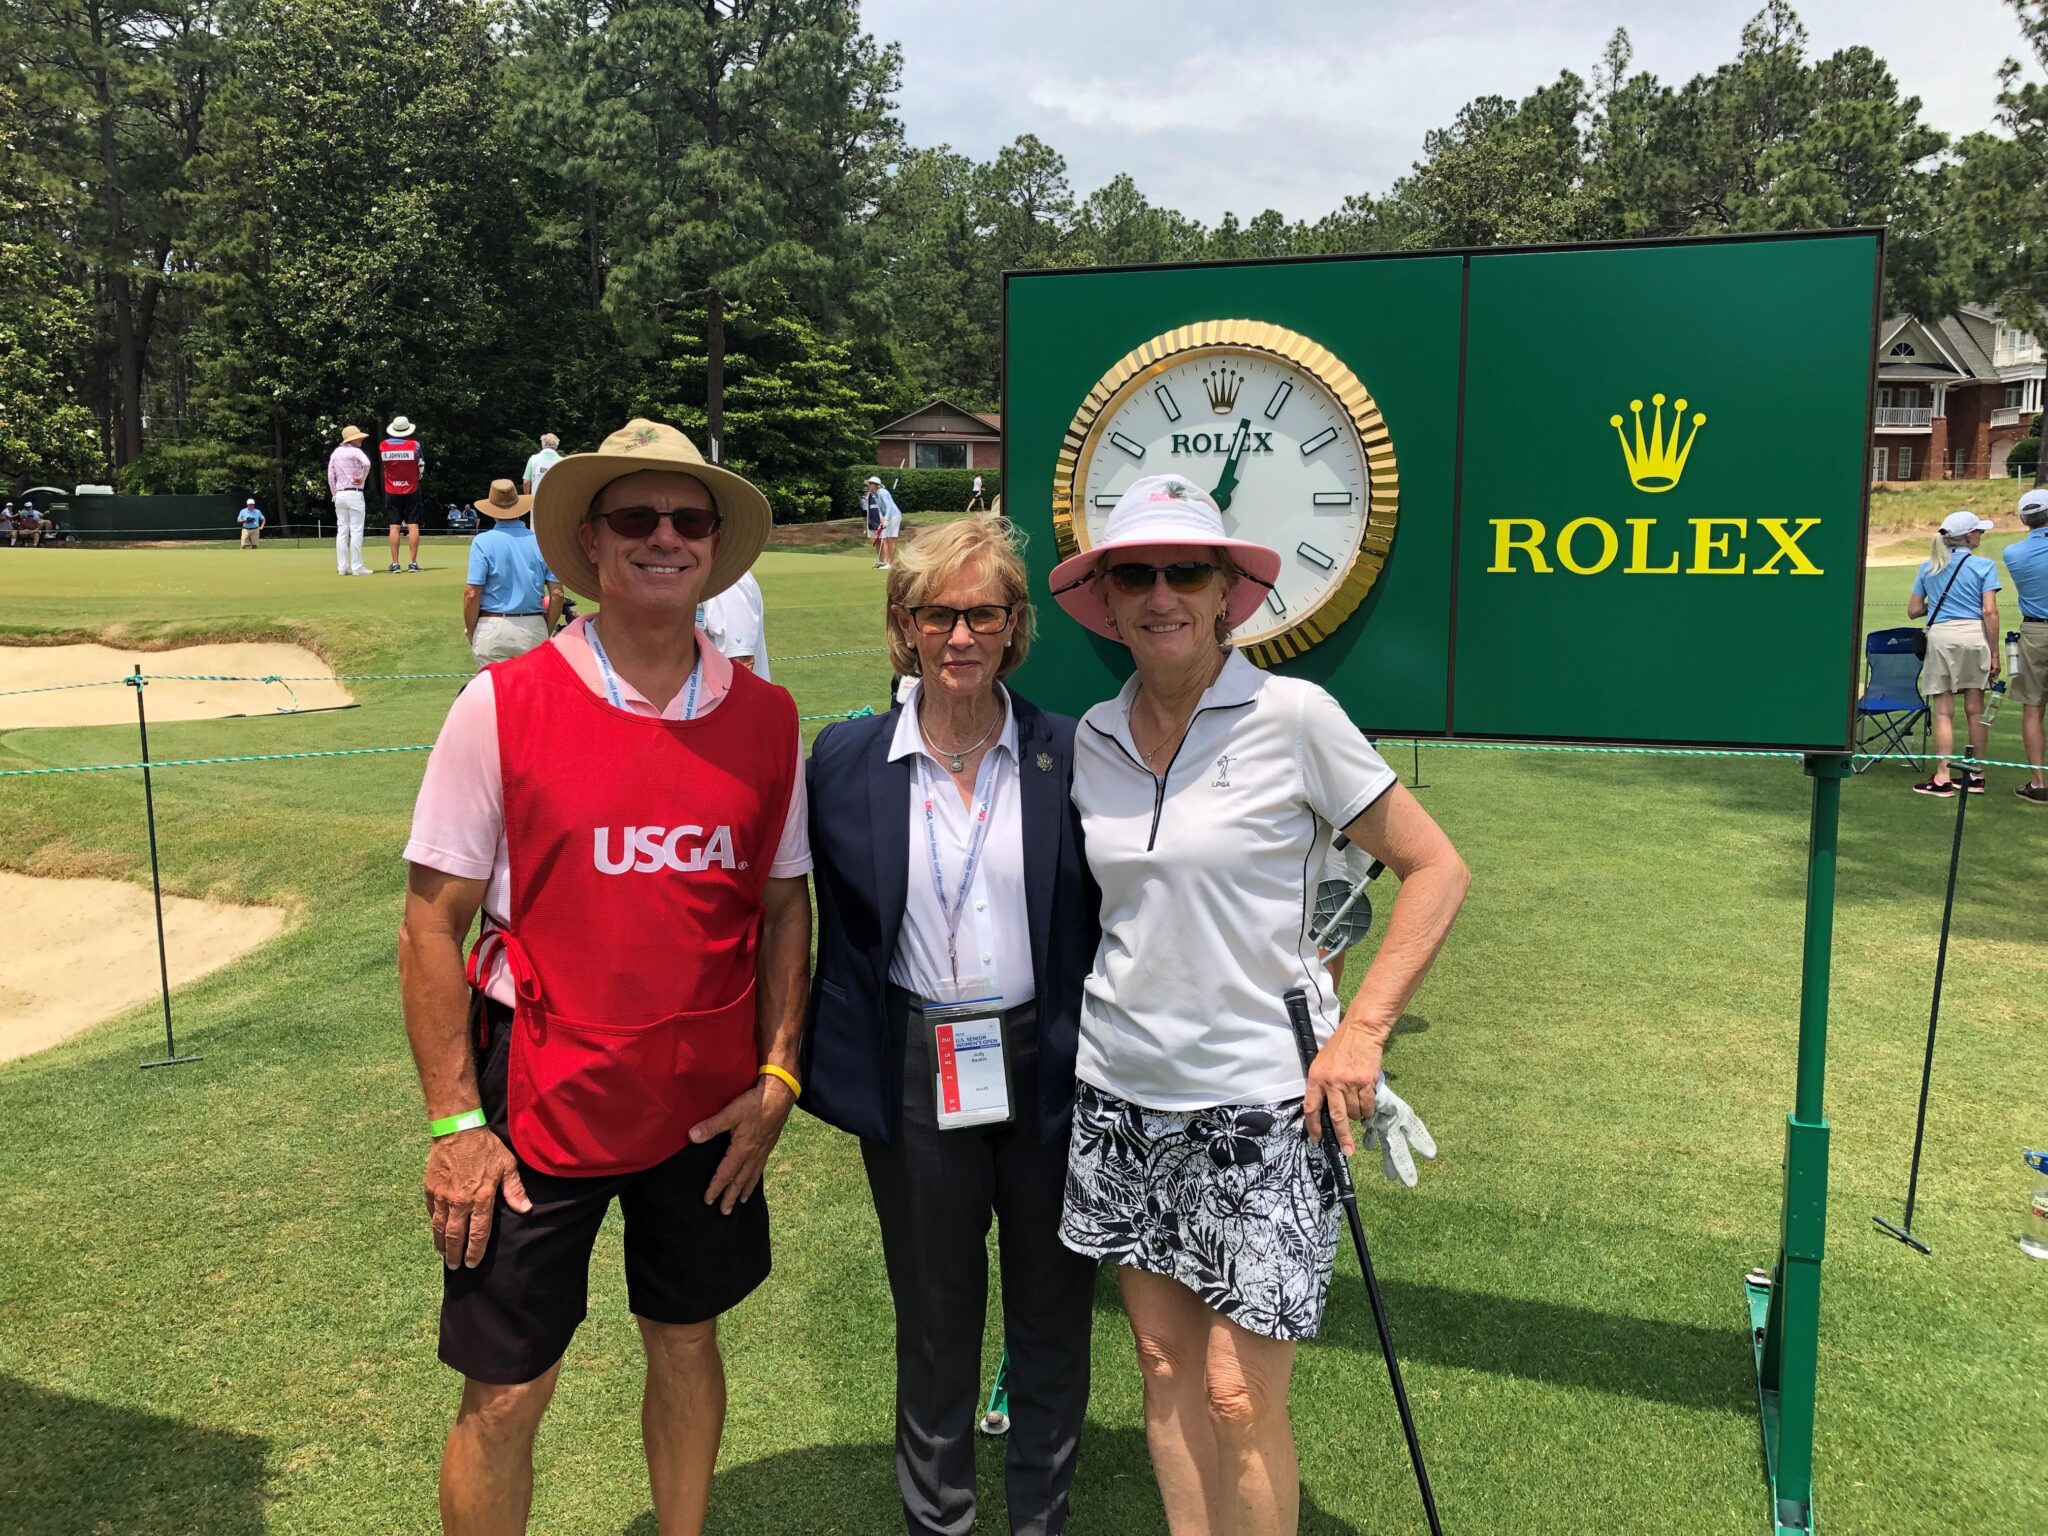 DONNA ANDREWS & SALLY AUSTIN – THE FACE OF WOMEN’S GOLF IN THE ...